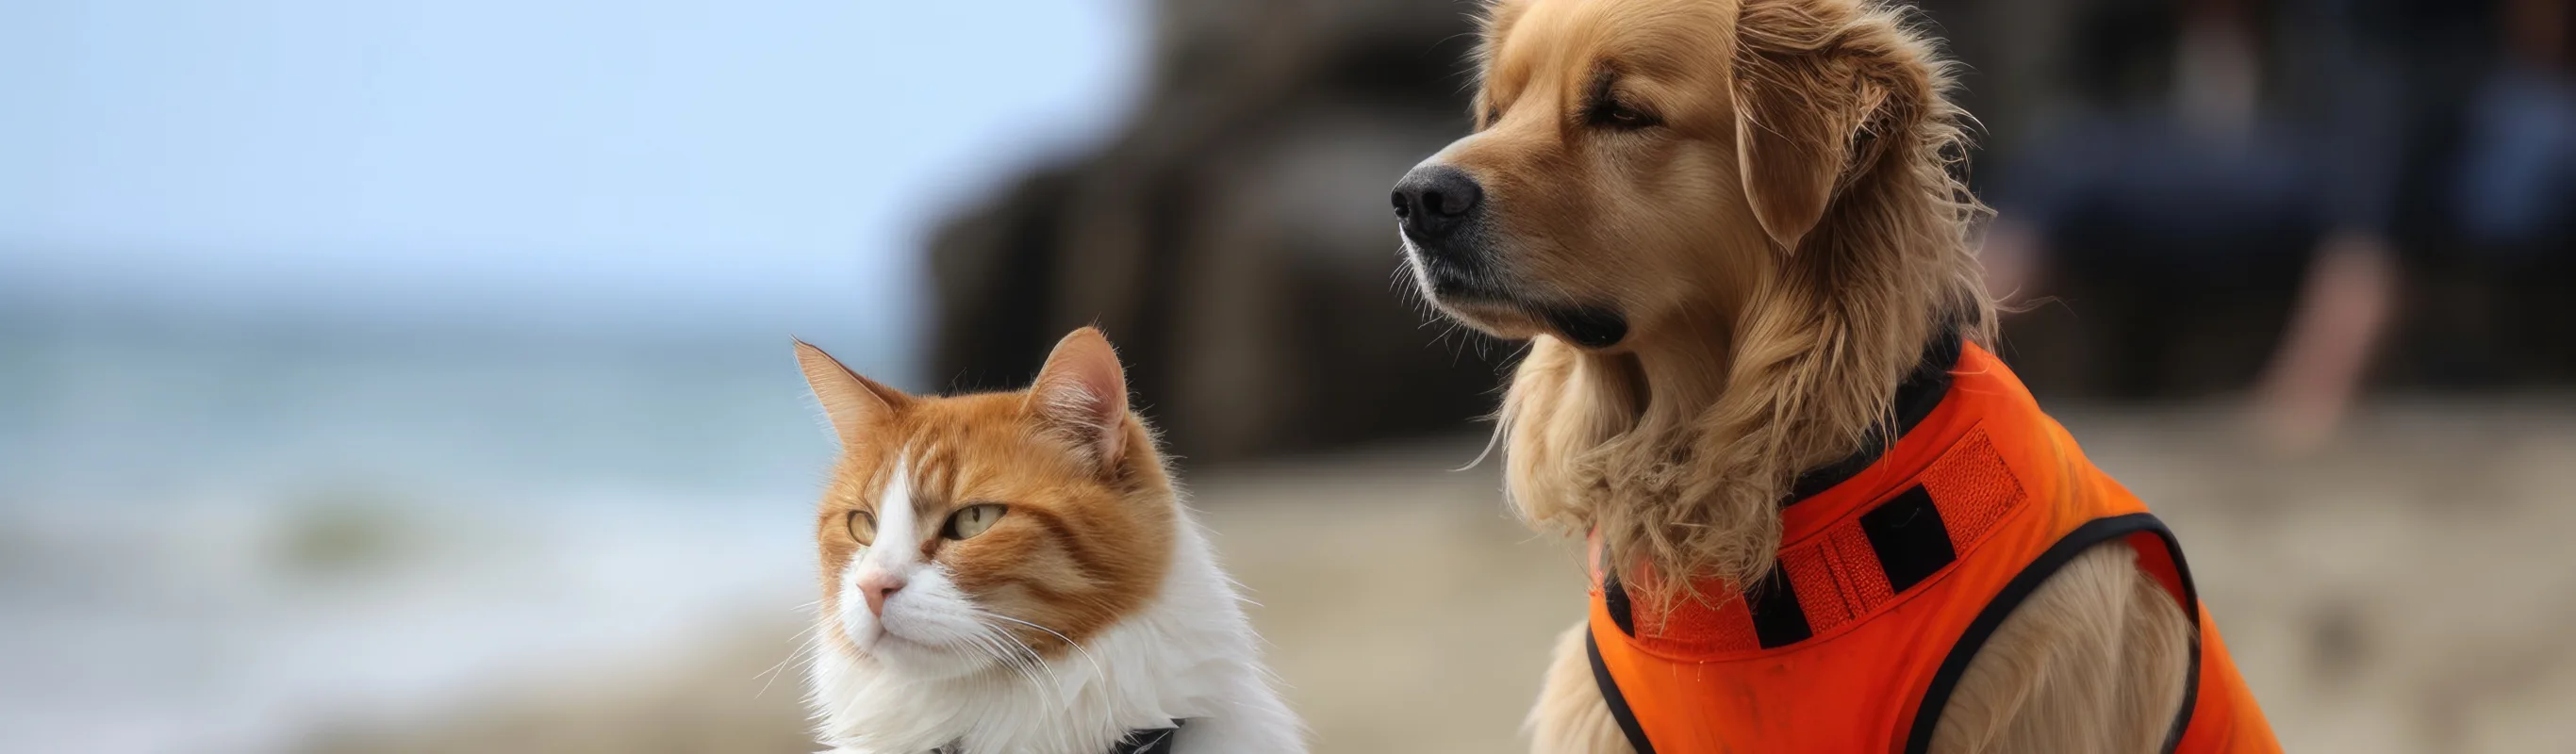 A dog and cat sitting on a beach